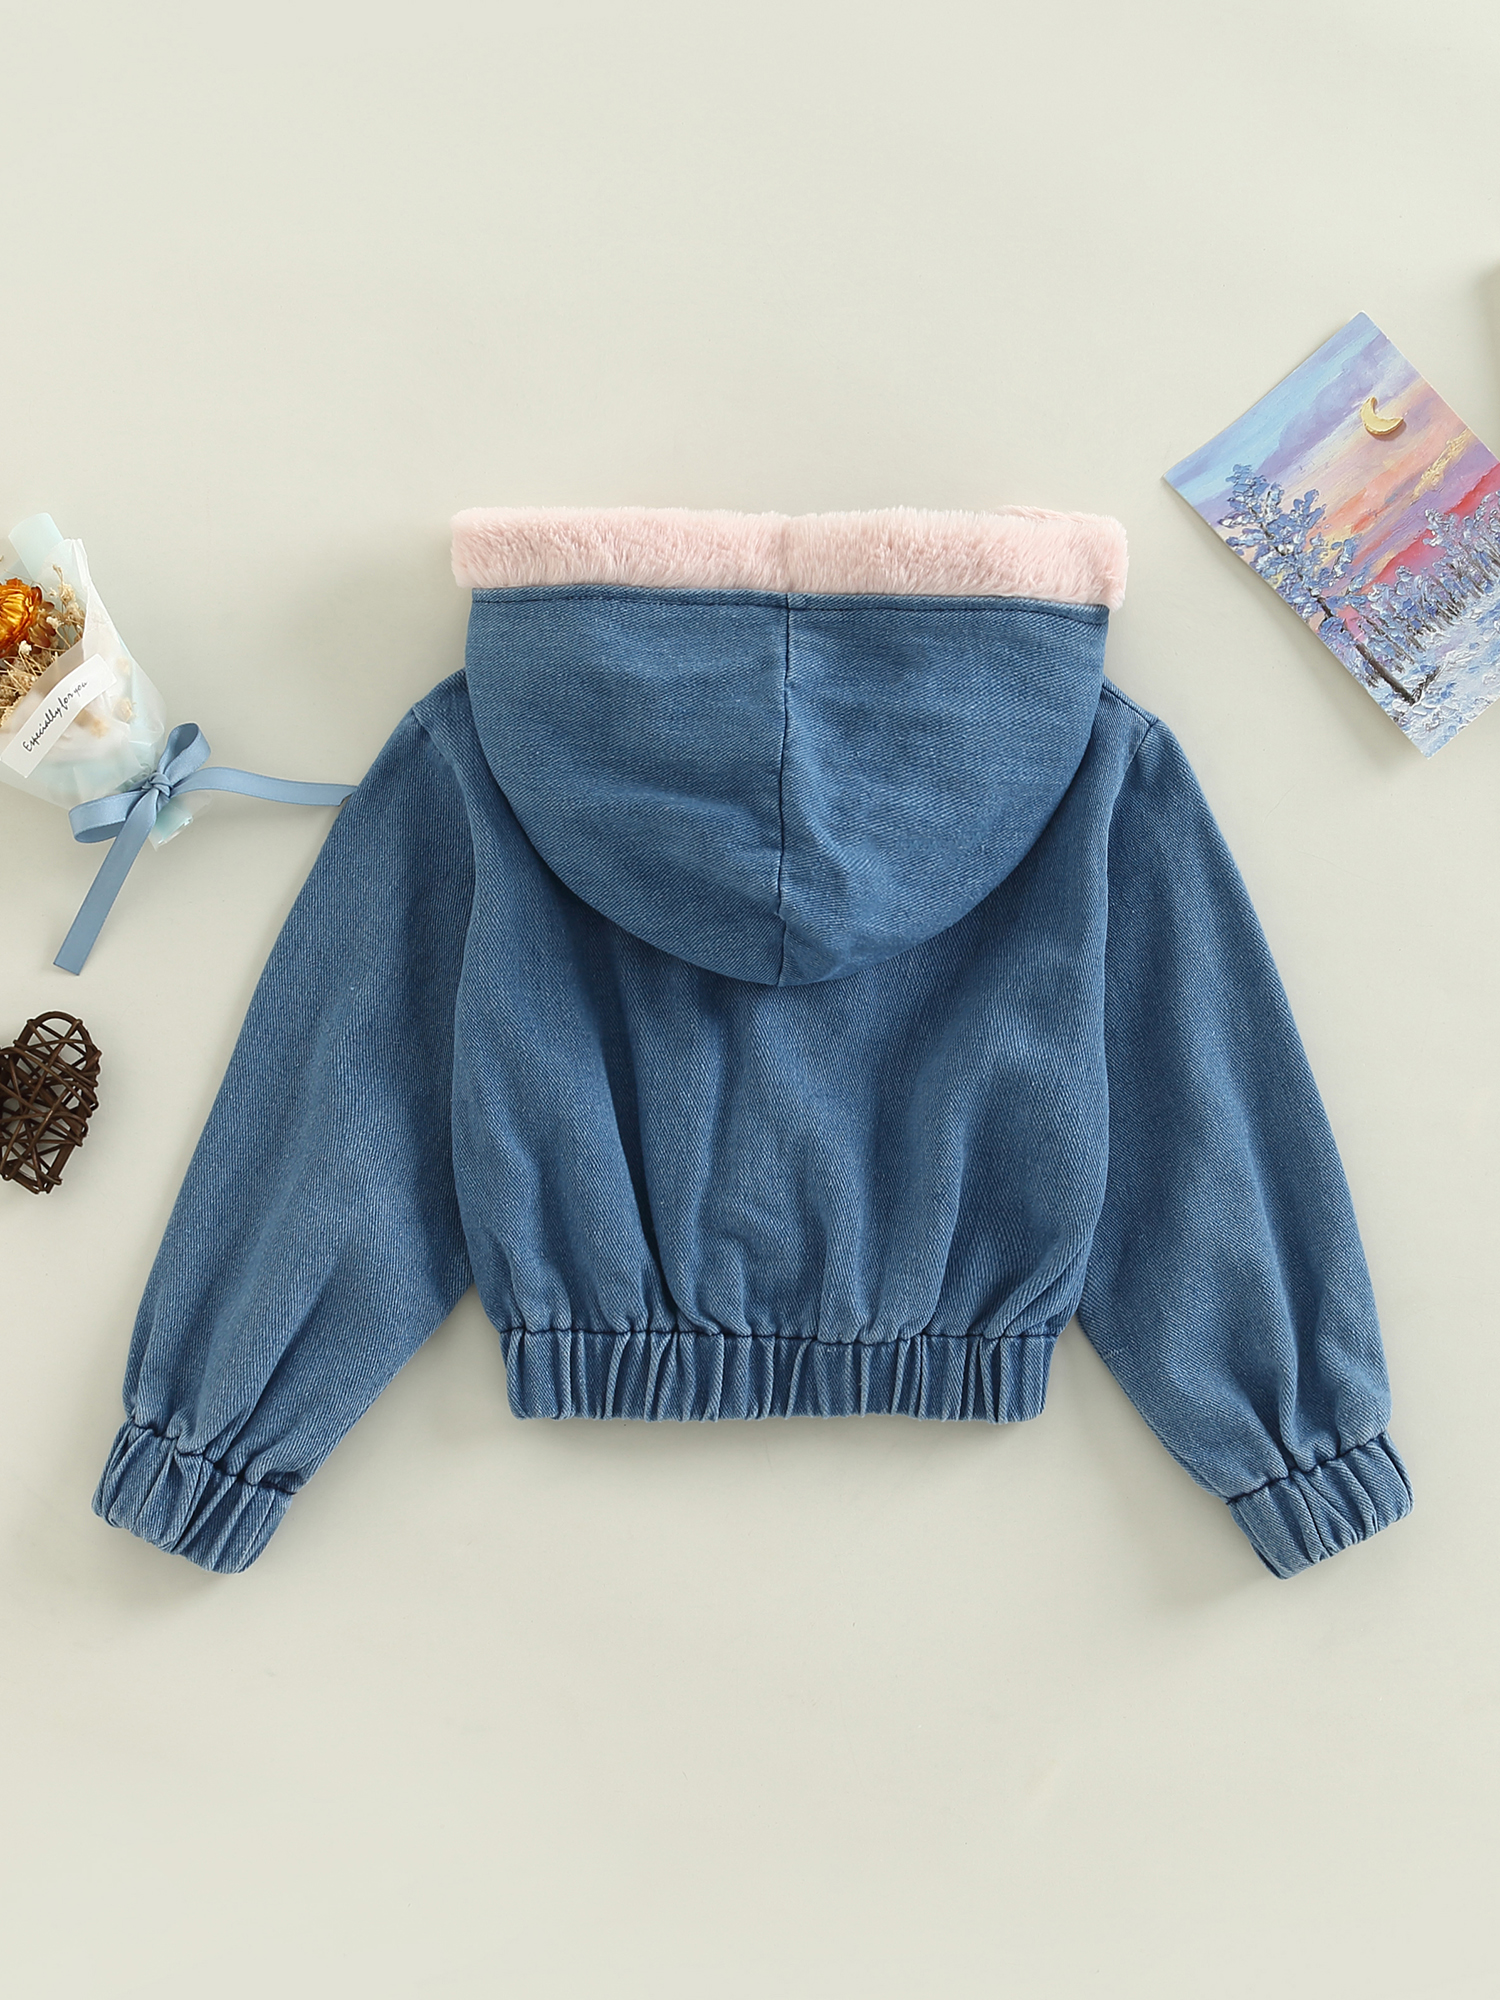 Jxzom Toddler Girls Hooded Denim Coat Long Sleeves Button Closure Thick Autumn Winter Jean Jacket - image 3 of 7